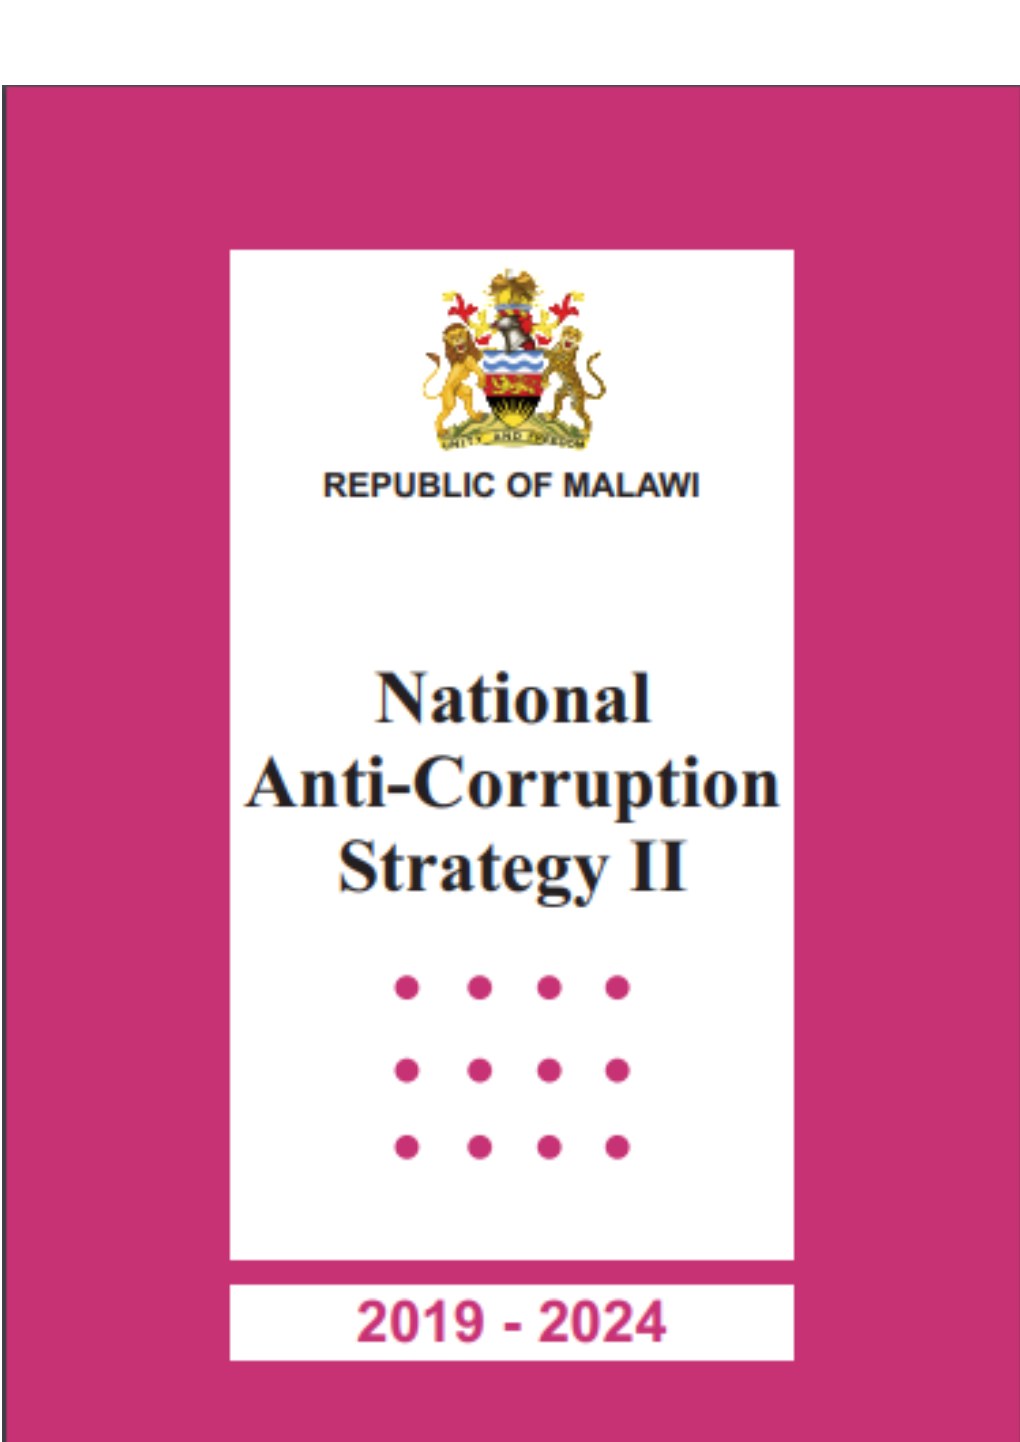 National Anti-Corruption Strategy II (NACS II) Is a Result of Government’S Continued Commitment to Zero Tolerance Stance on Corruption